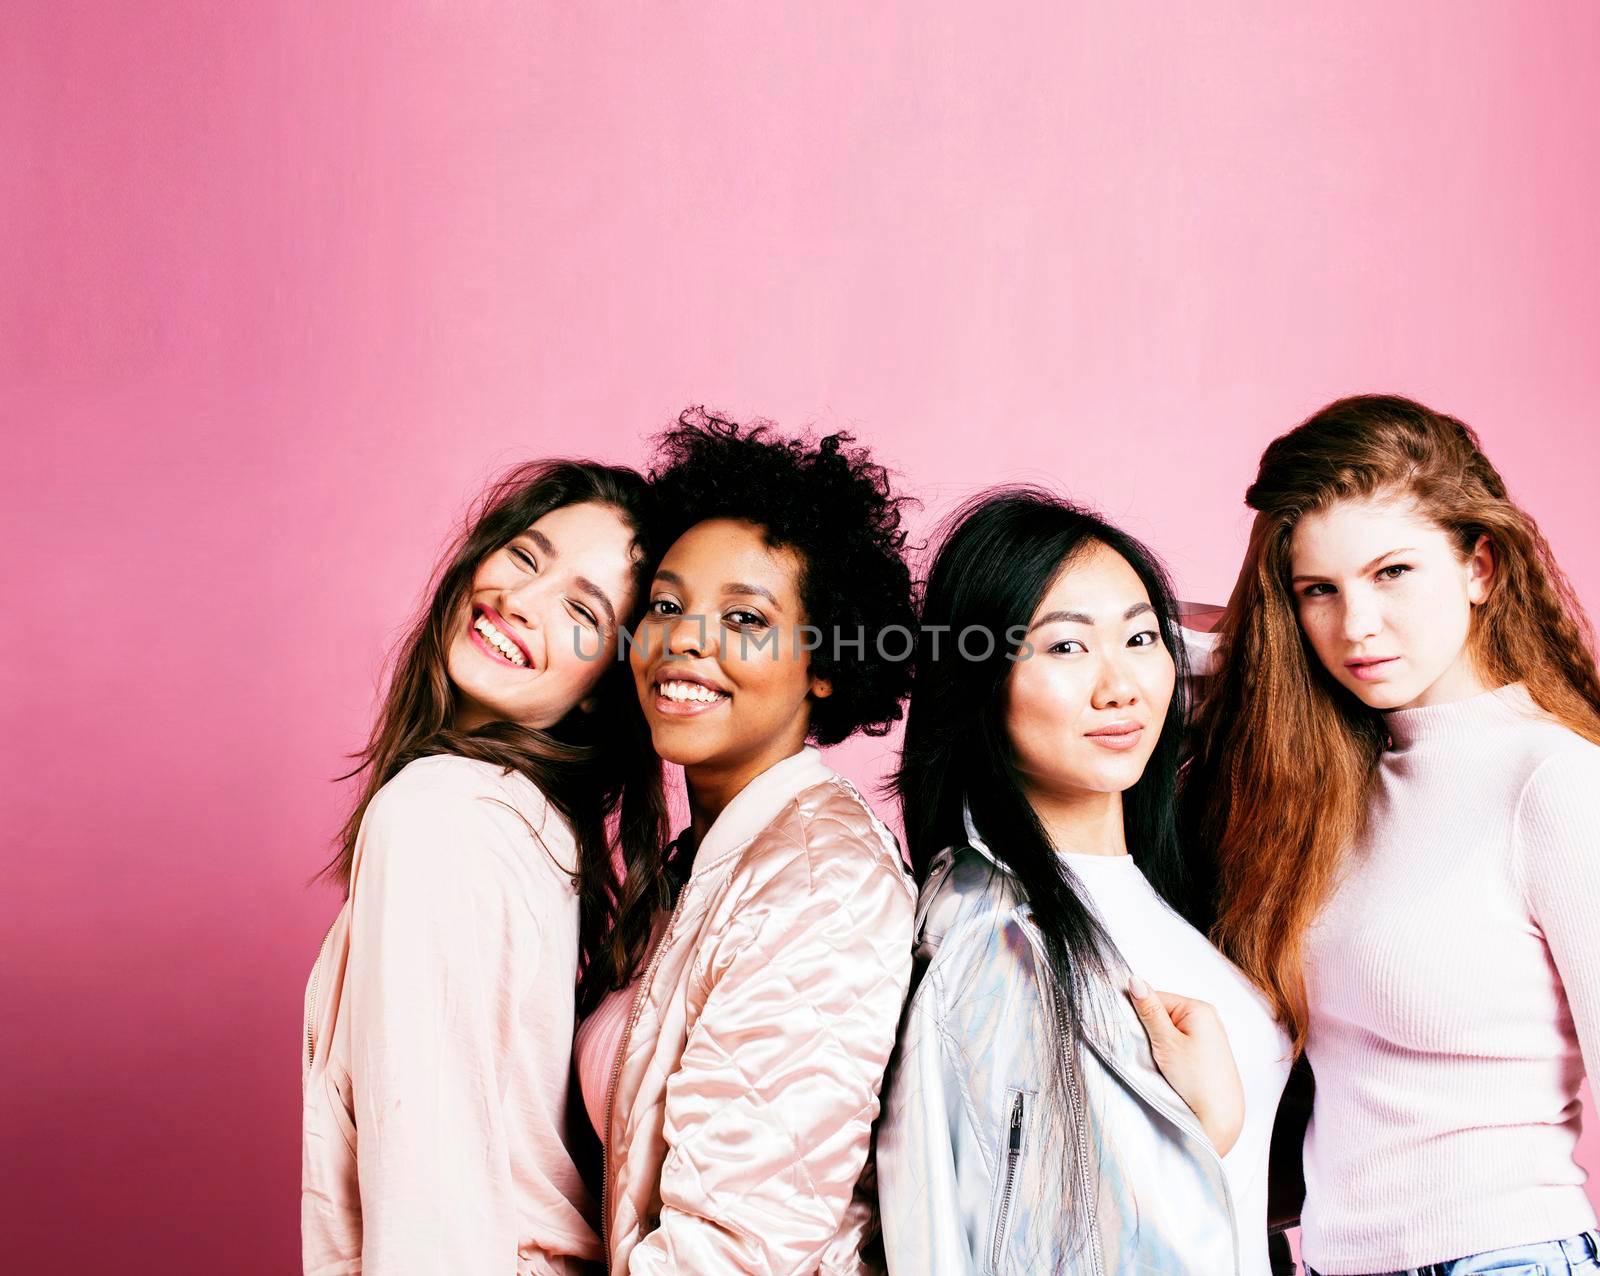 different nation girls with diversuty in skin, hair. Asian, scandinavian, african american cheerful emotional posing on pink background, woman day celebration, lifestyle people concept by JordanJ